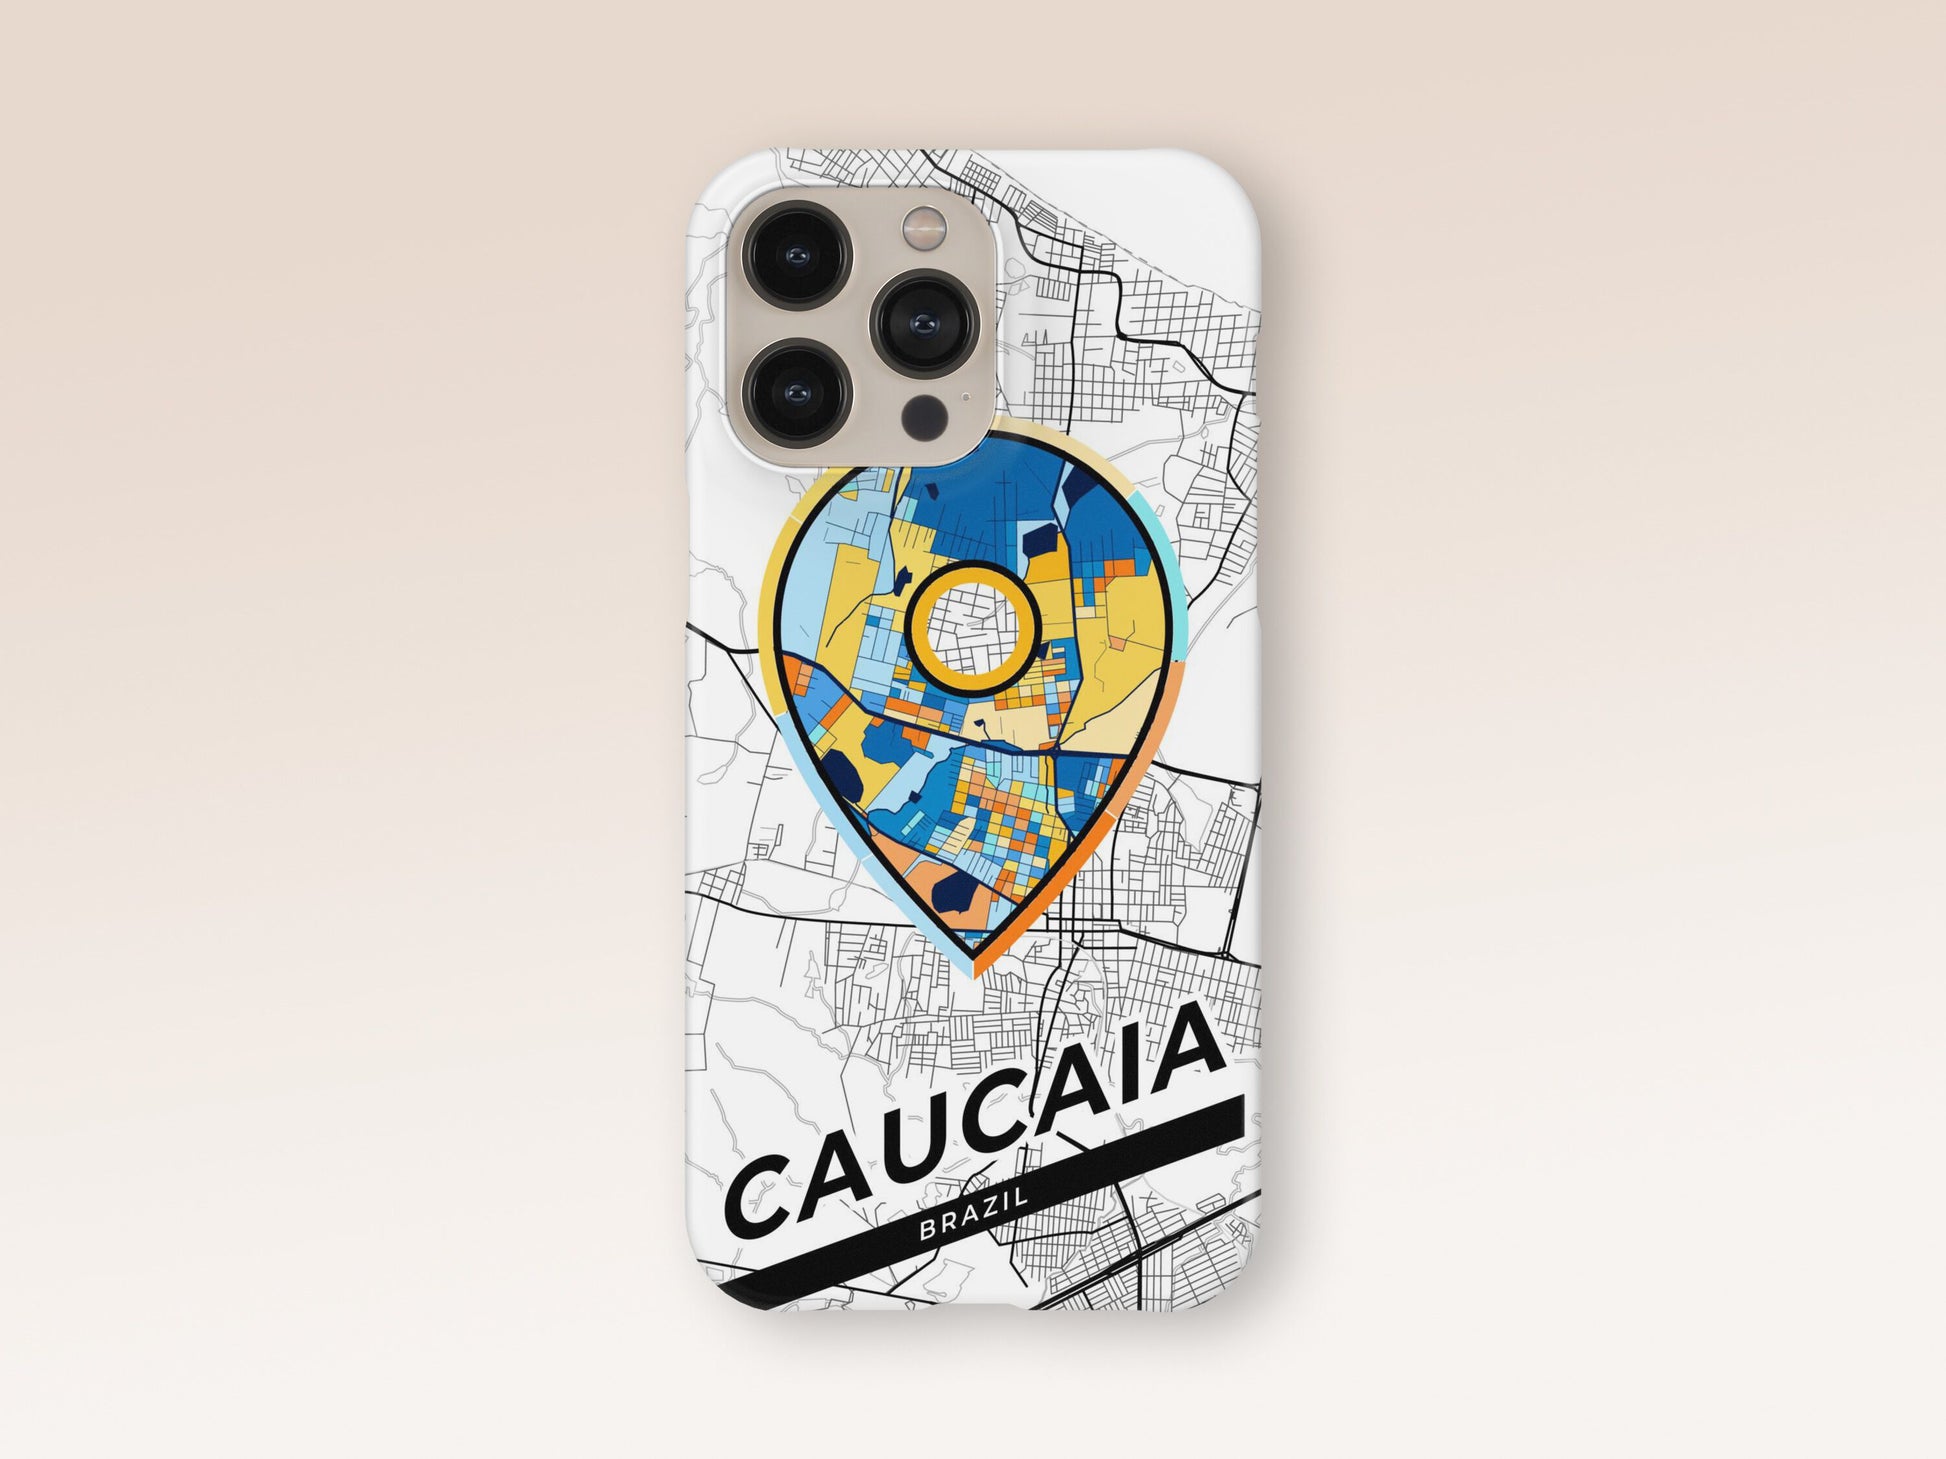 Caucaia Brazil slim phone case with colorful icon. Birthday, wedding or housewarming gift. Couple match cases. 1